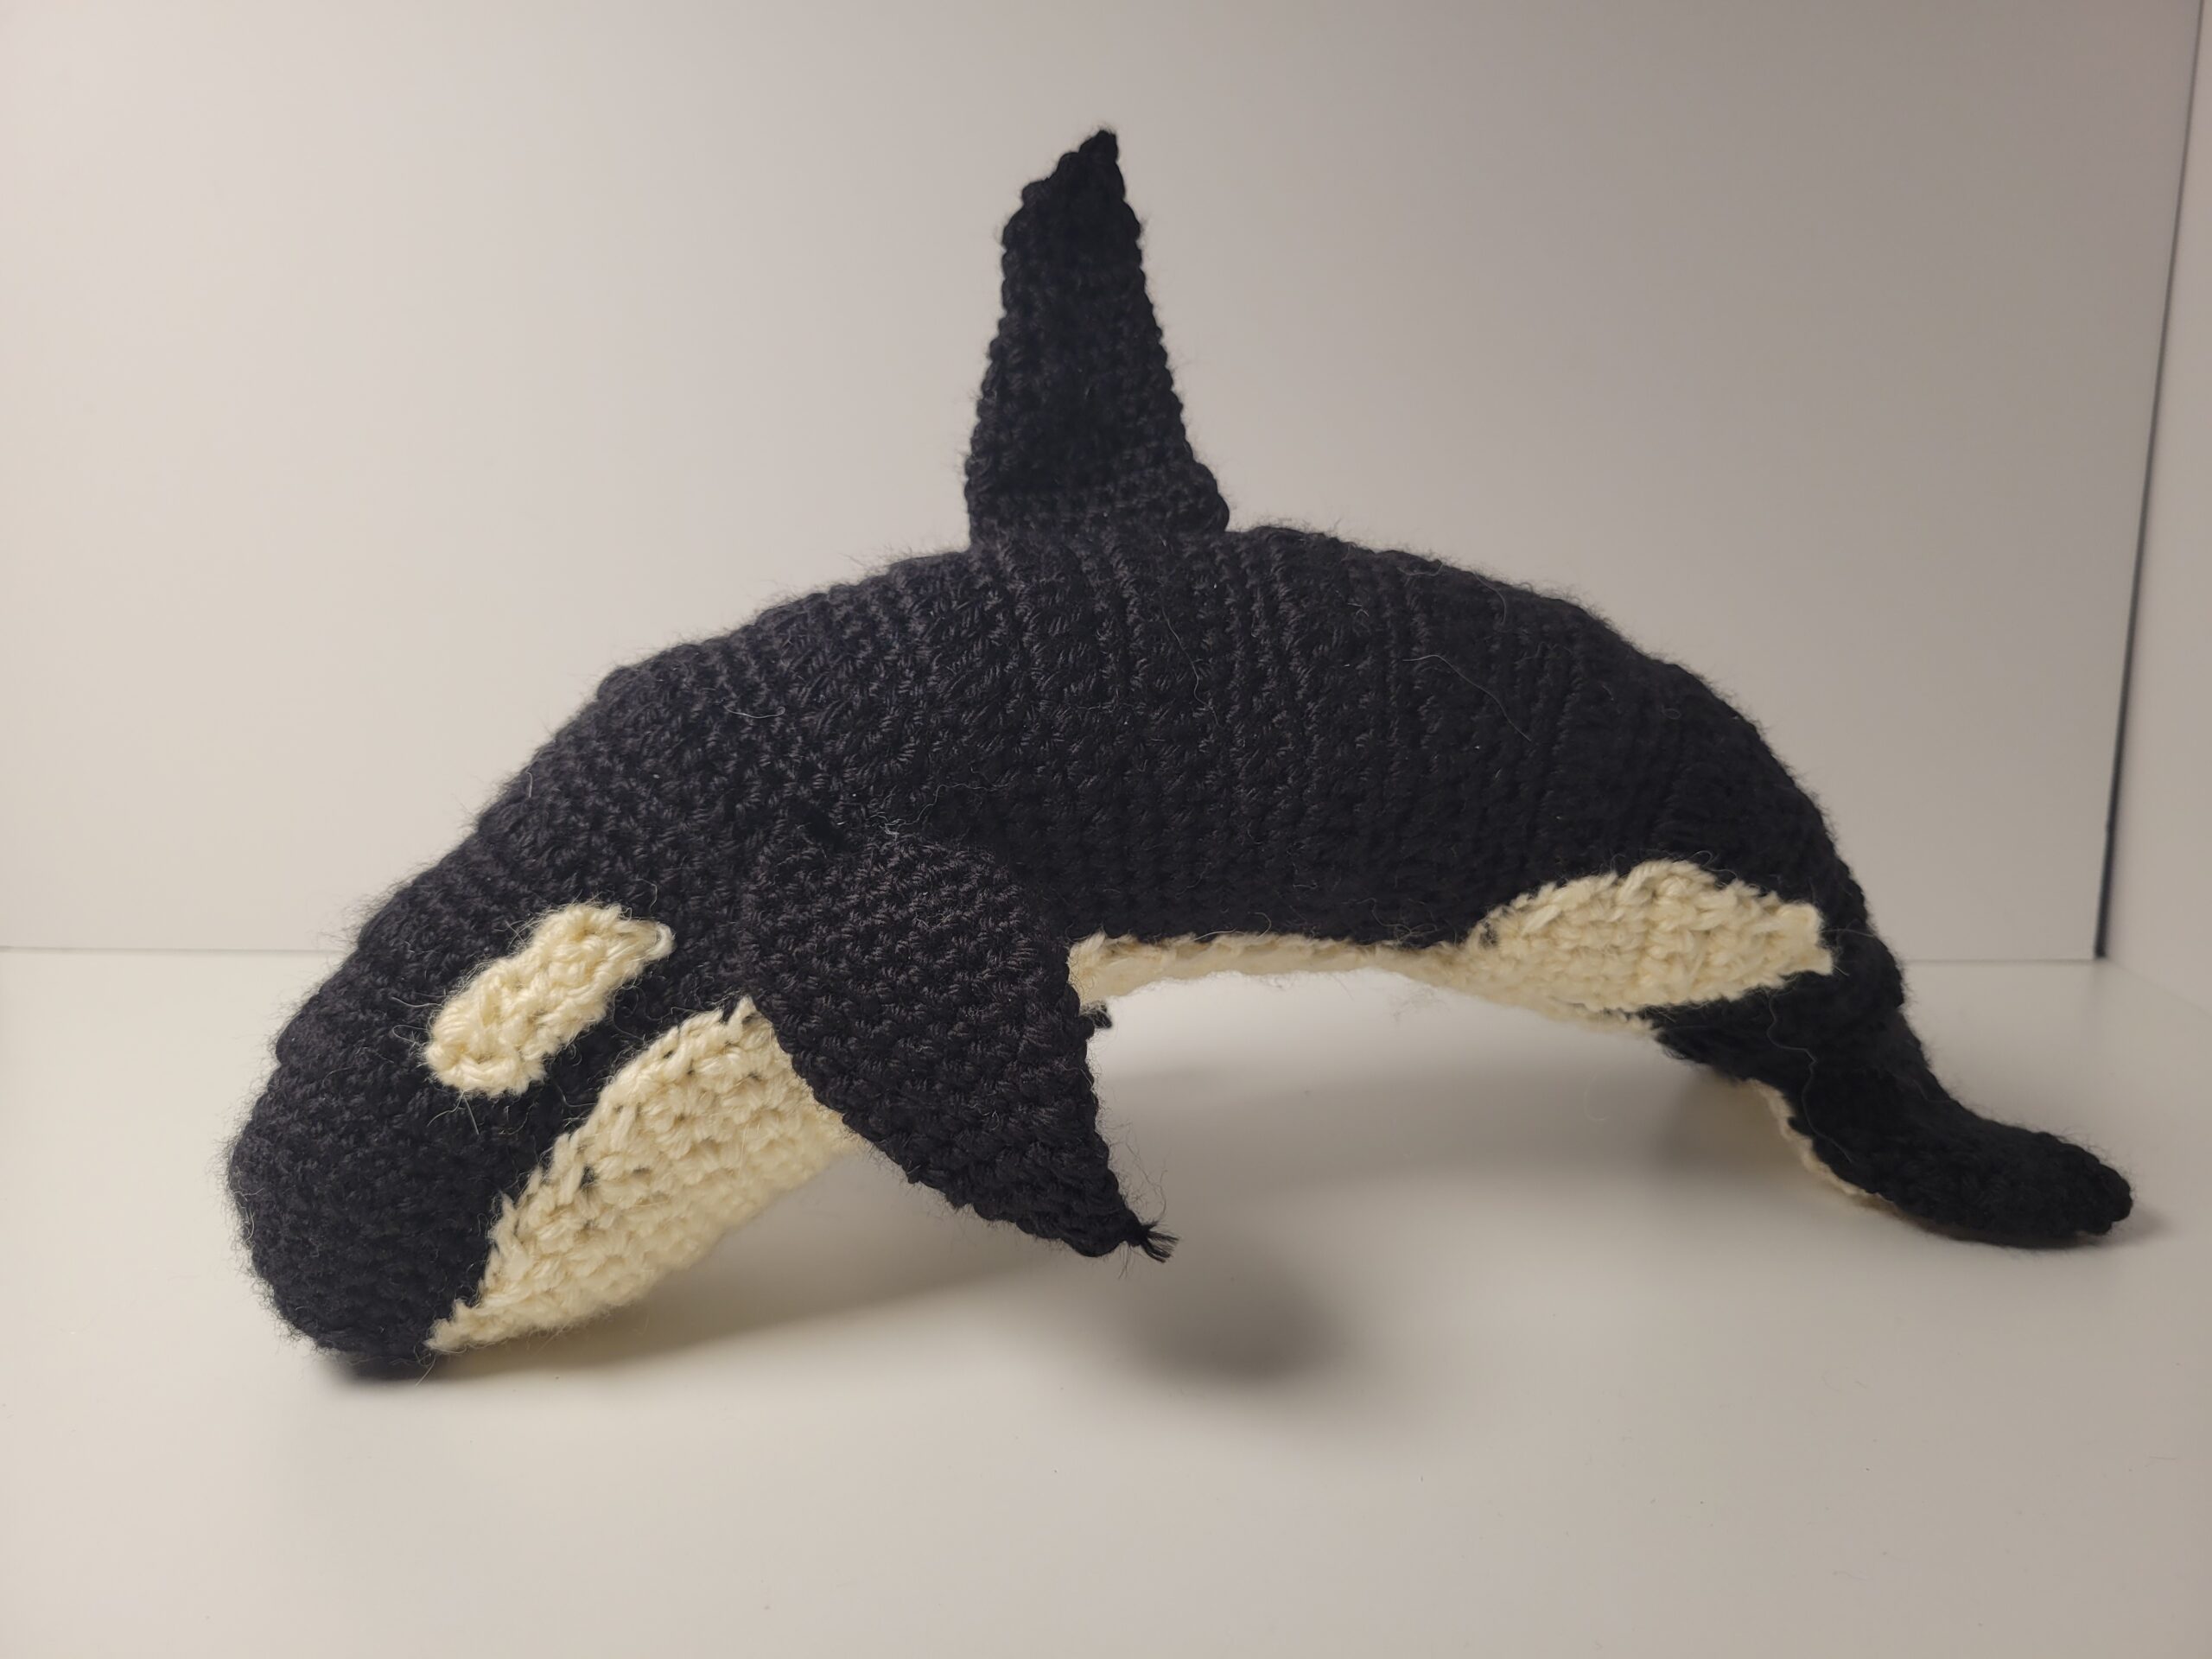 How to: Pattern vs Reality 17: Crochet Orca Whale